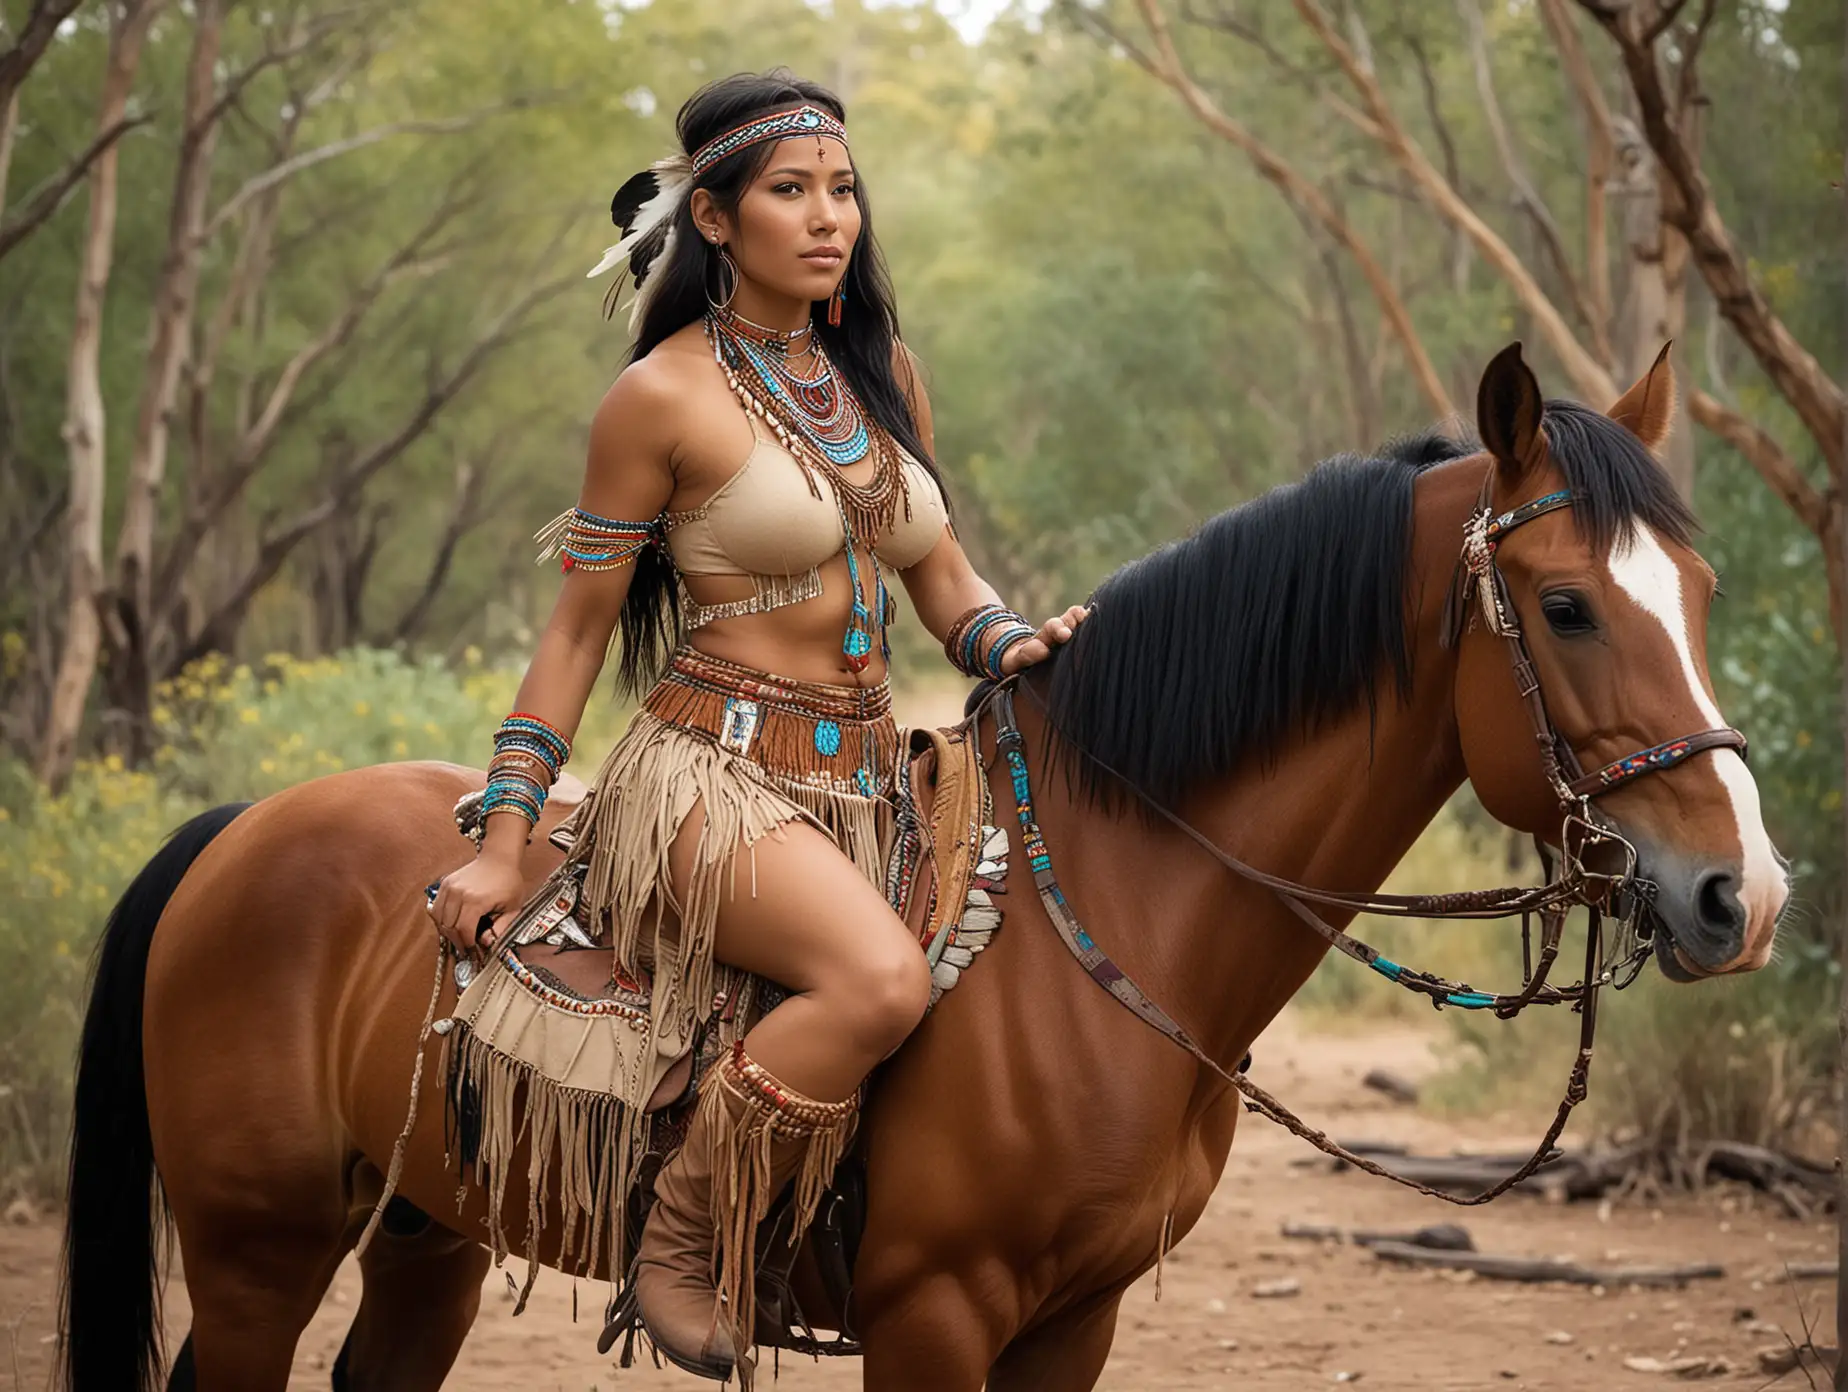 Elegant-Native-American-Woman-Riding-a-Majestic-Horse-in-Enchanting-Wilderness